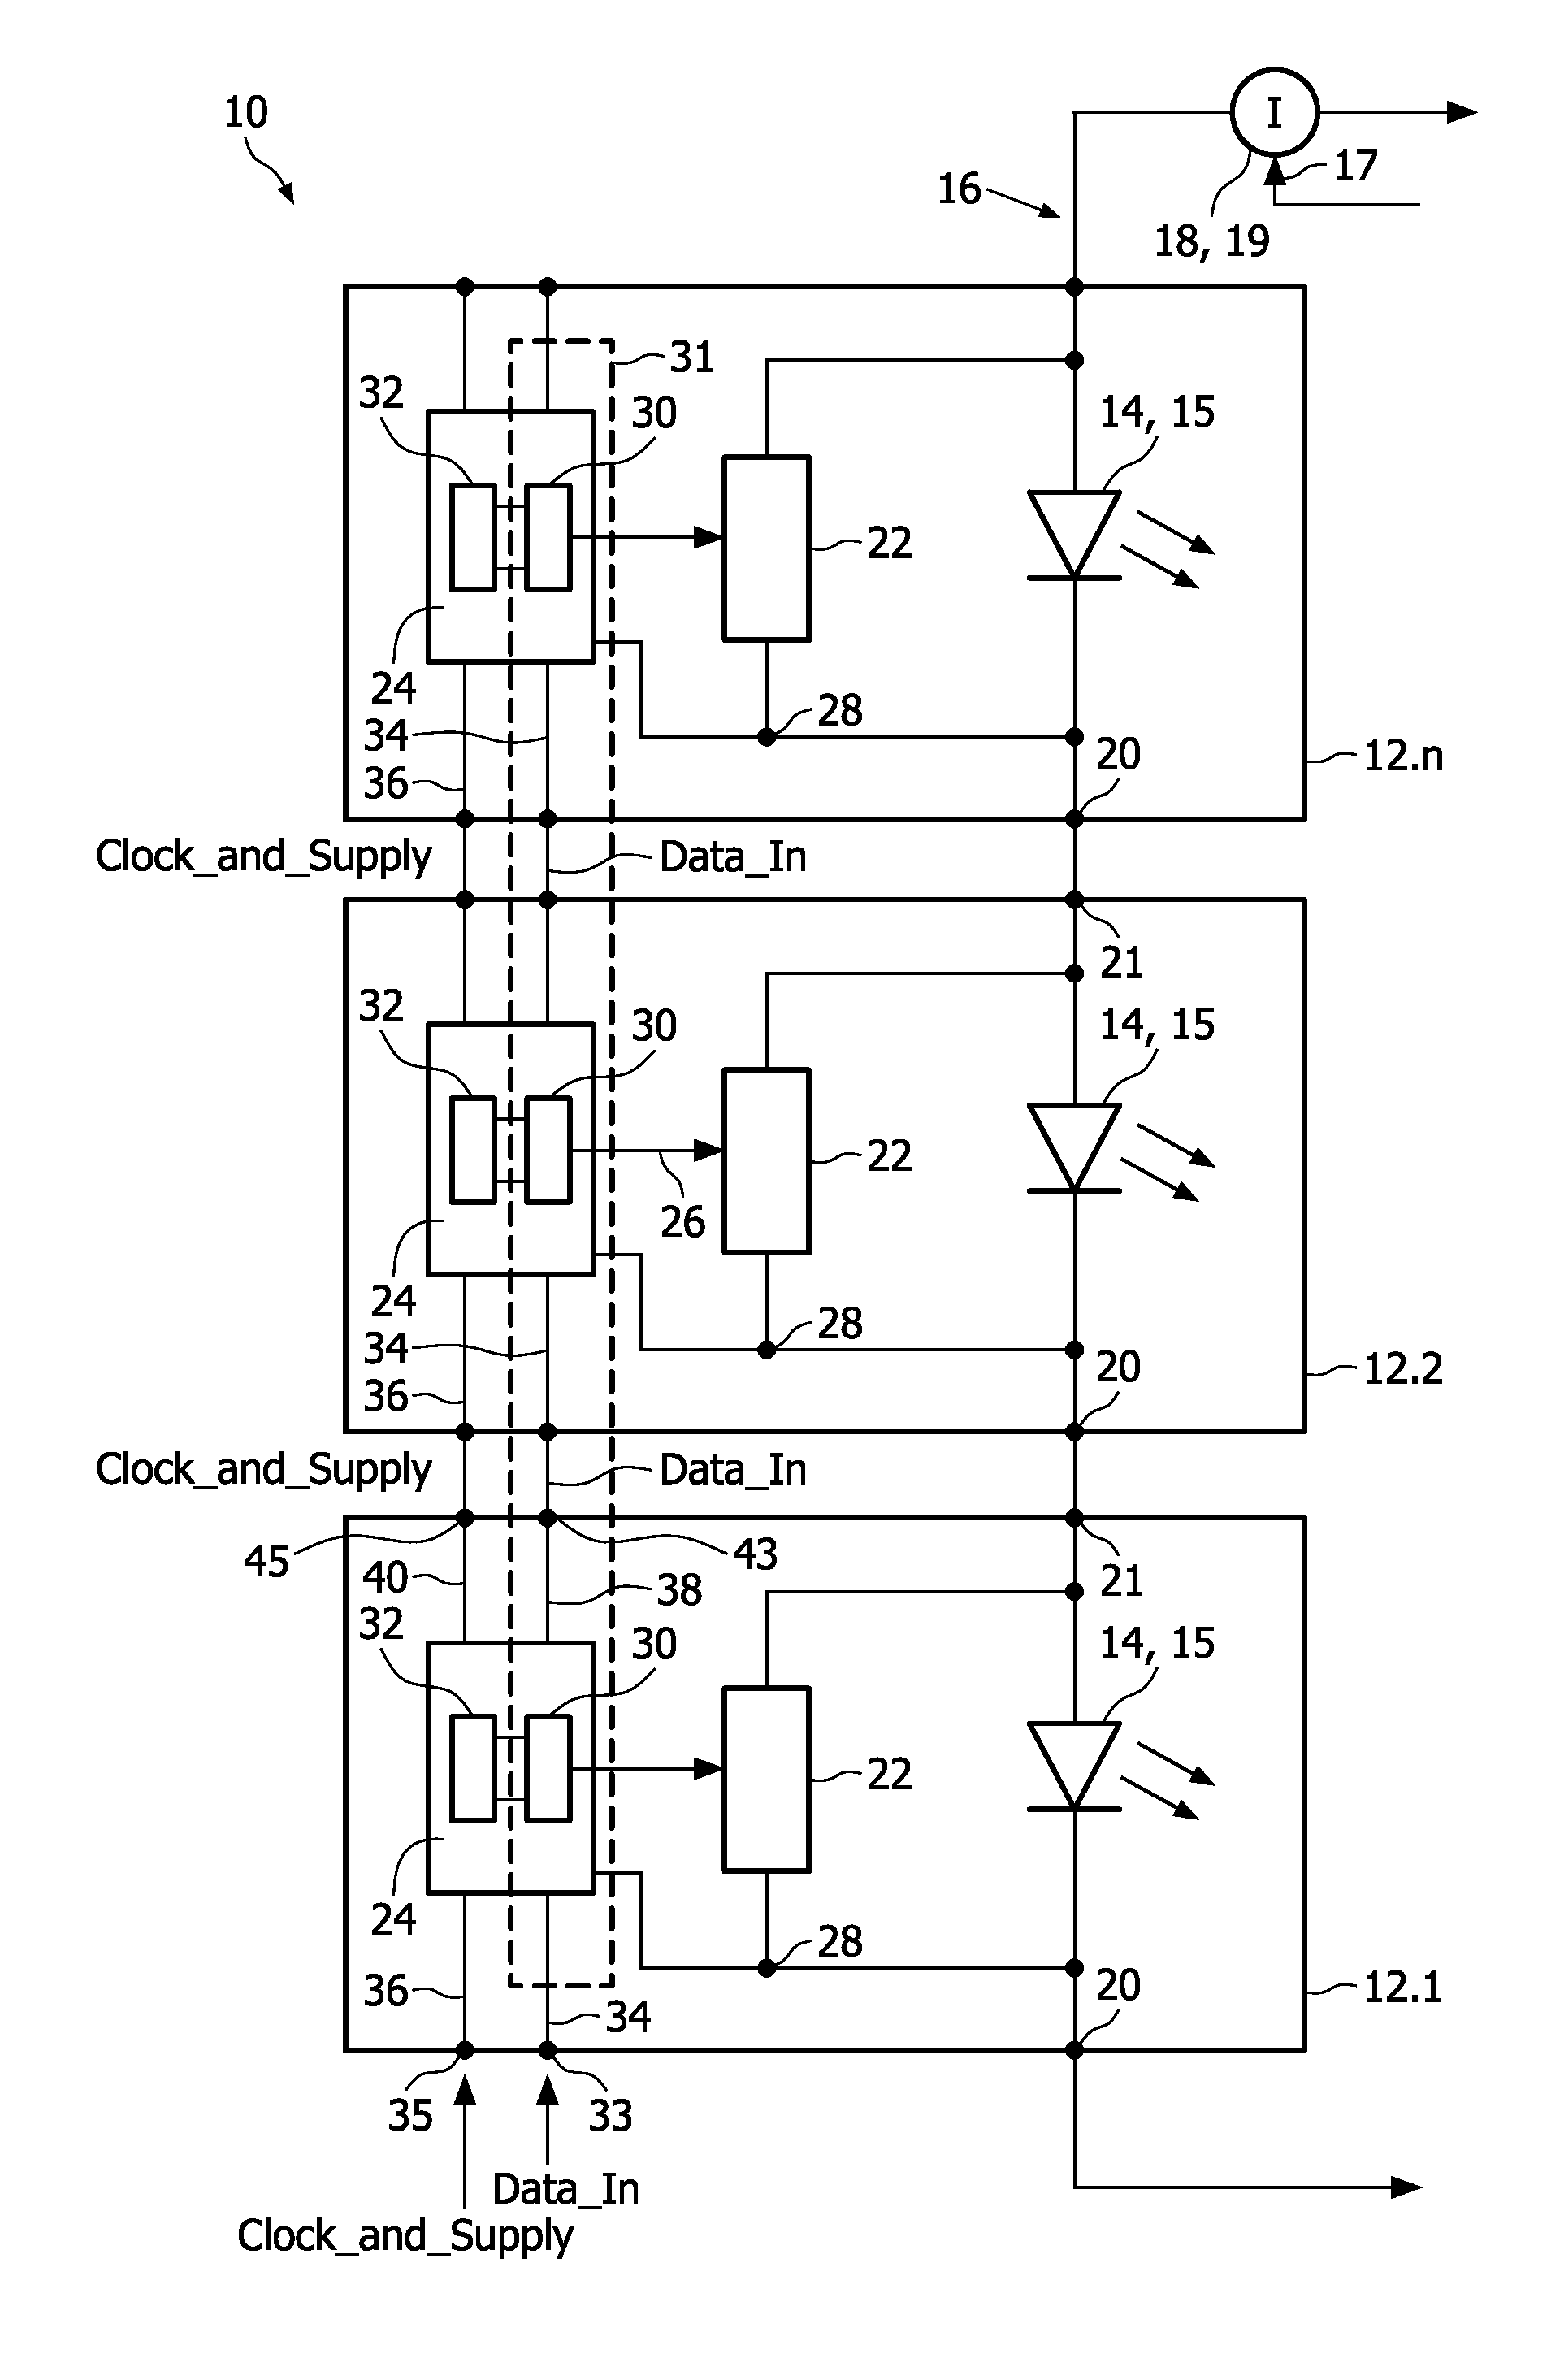 LED string driver with shift register and level shifter